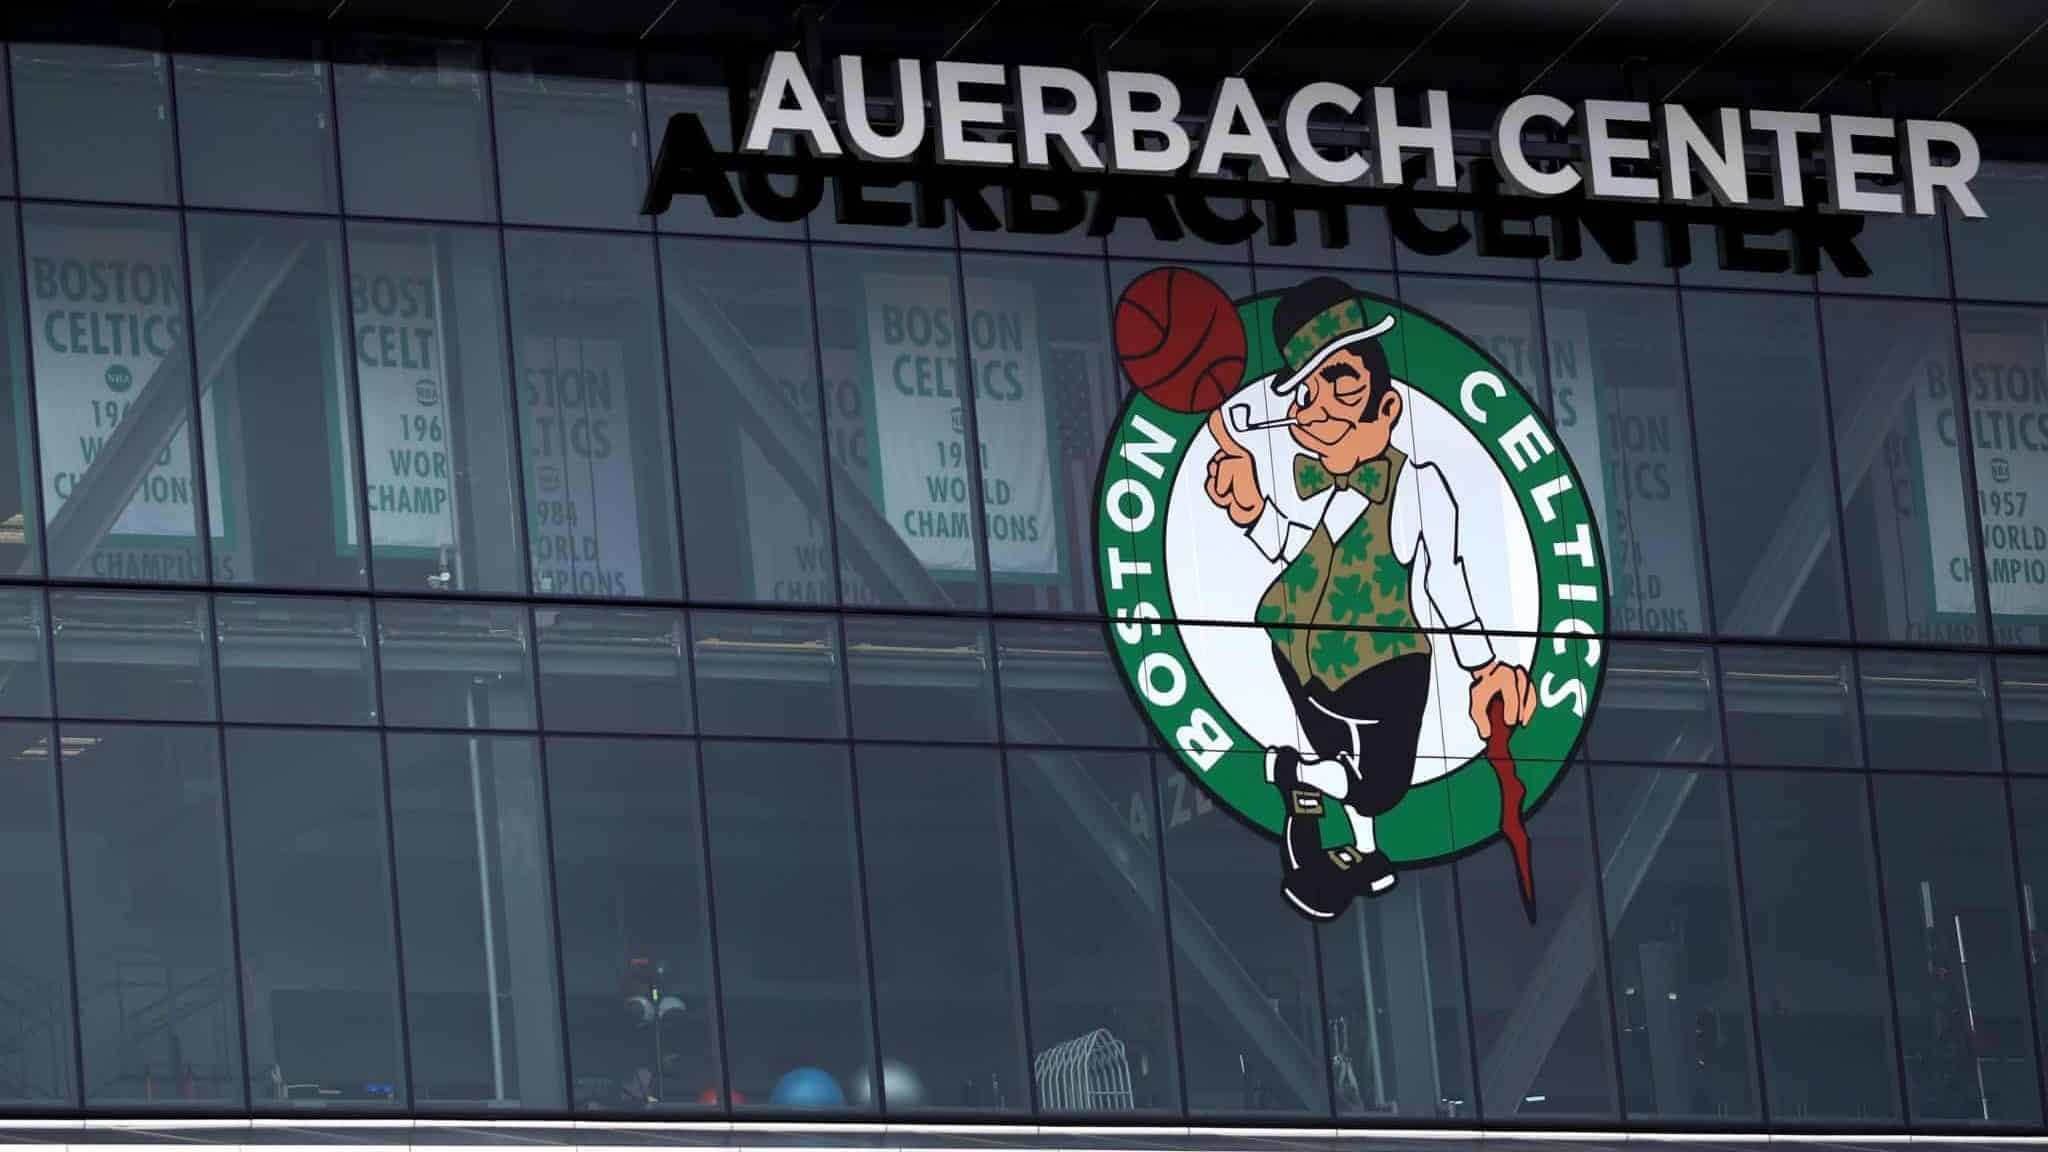 BOSTON, MASSACHUSETTS - APRIL 28: The practice facility of the Boston Celtics is seen during the coronavirus (COVID-19) pandemic on April 28, 2020 in Boston, Massachusetts. The NBA recently announced the possible re-opening of team practice facilities as early as May 1.